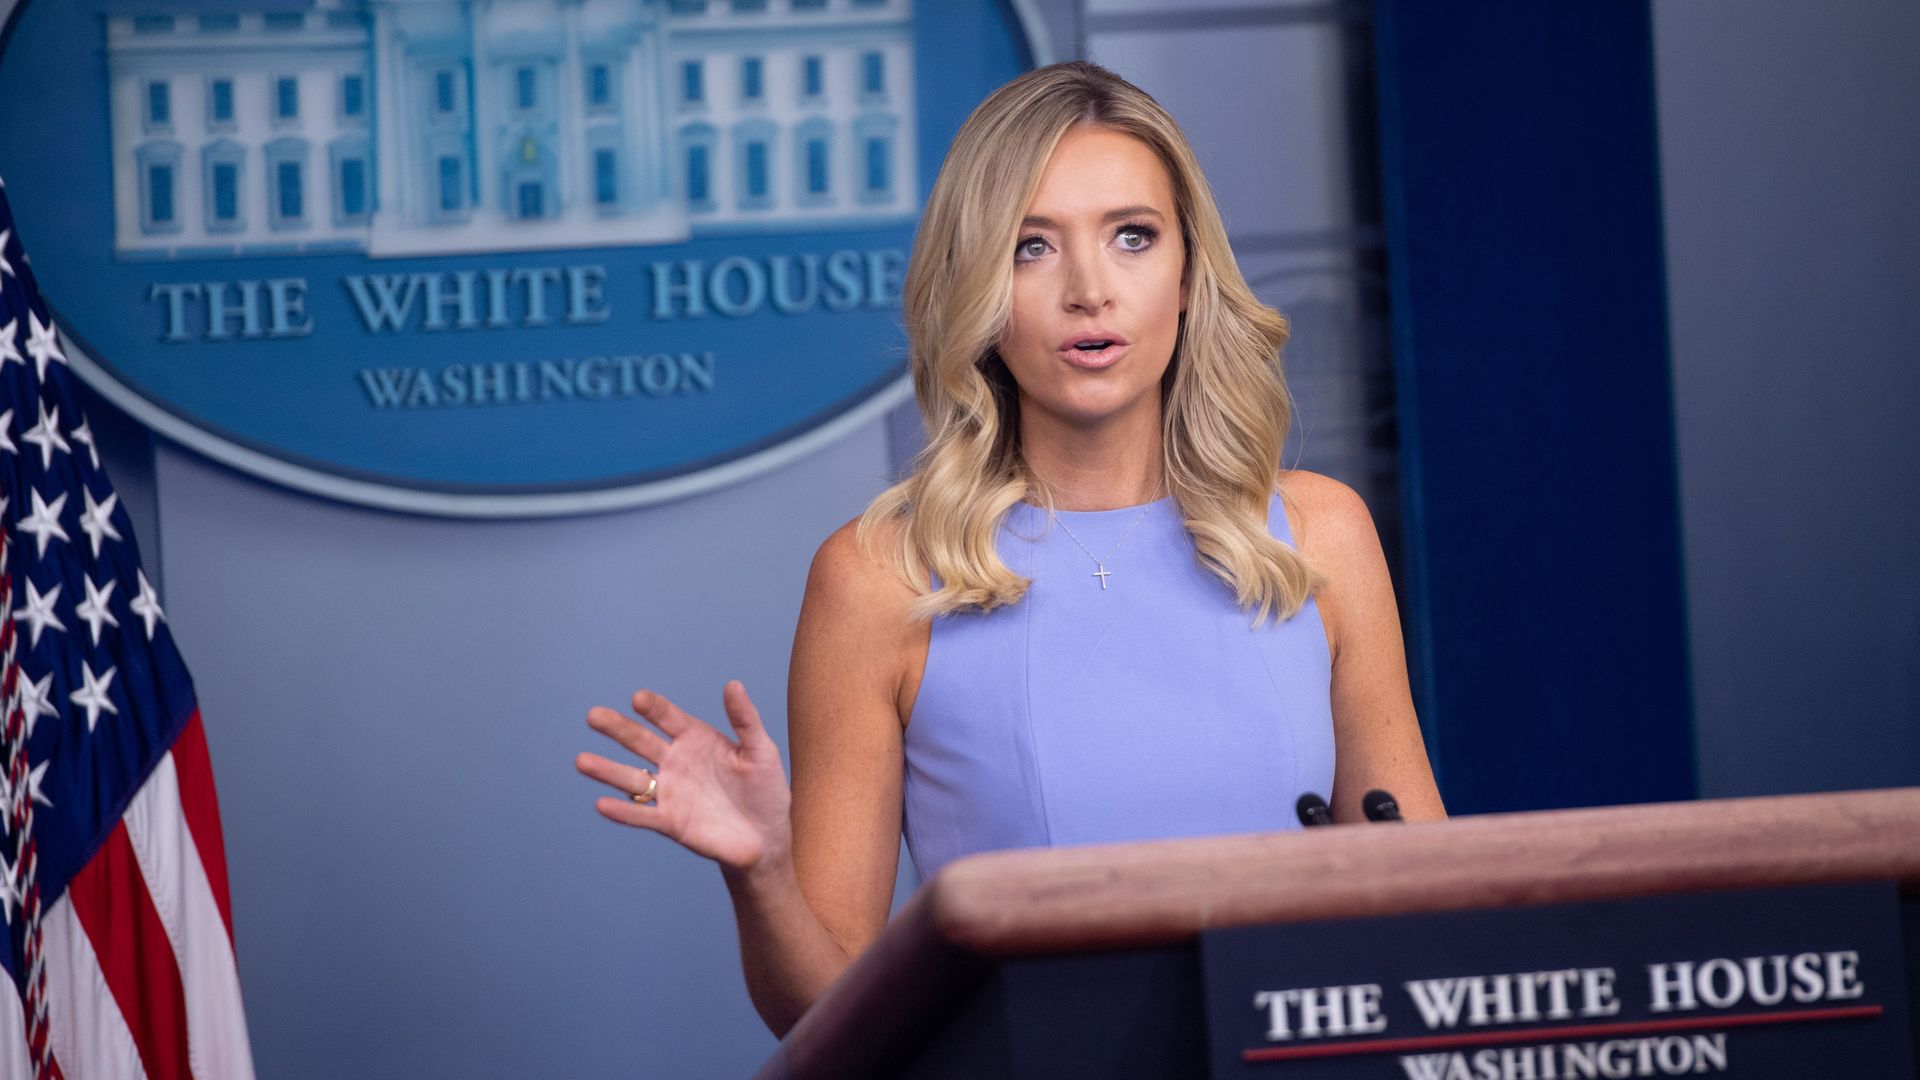 White House Press Secretary Kayleigh McEnany in a press conference on June 17.